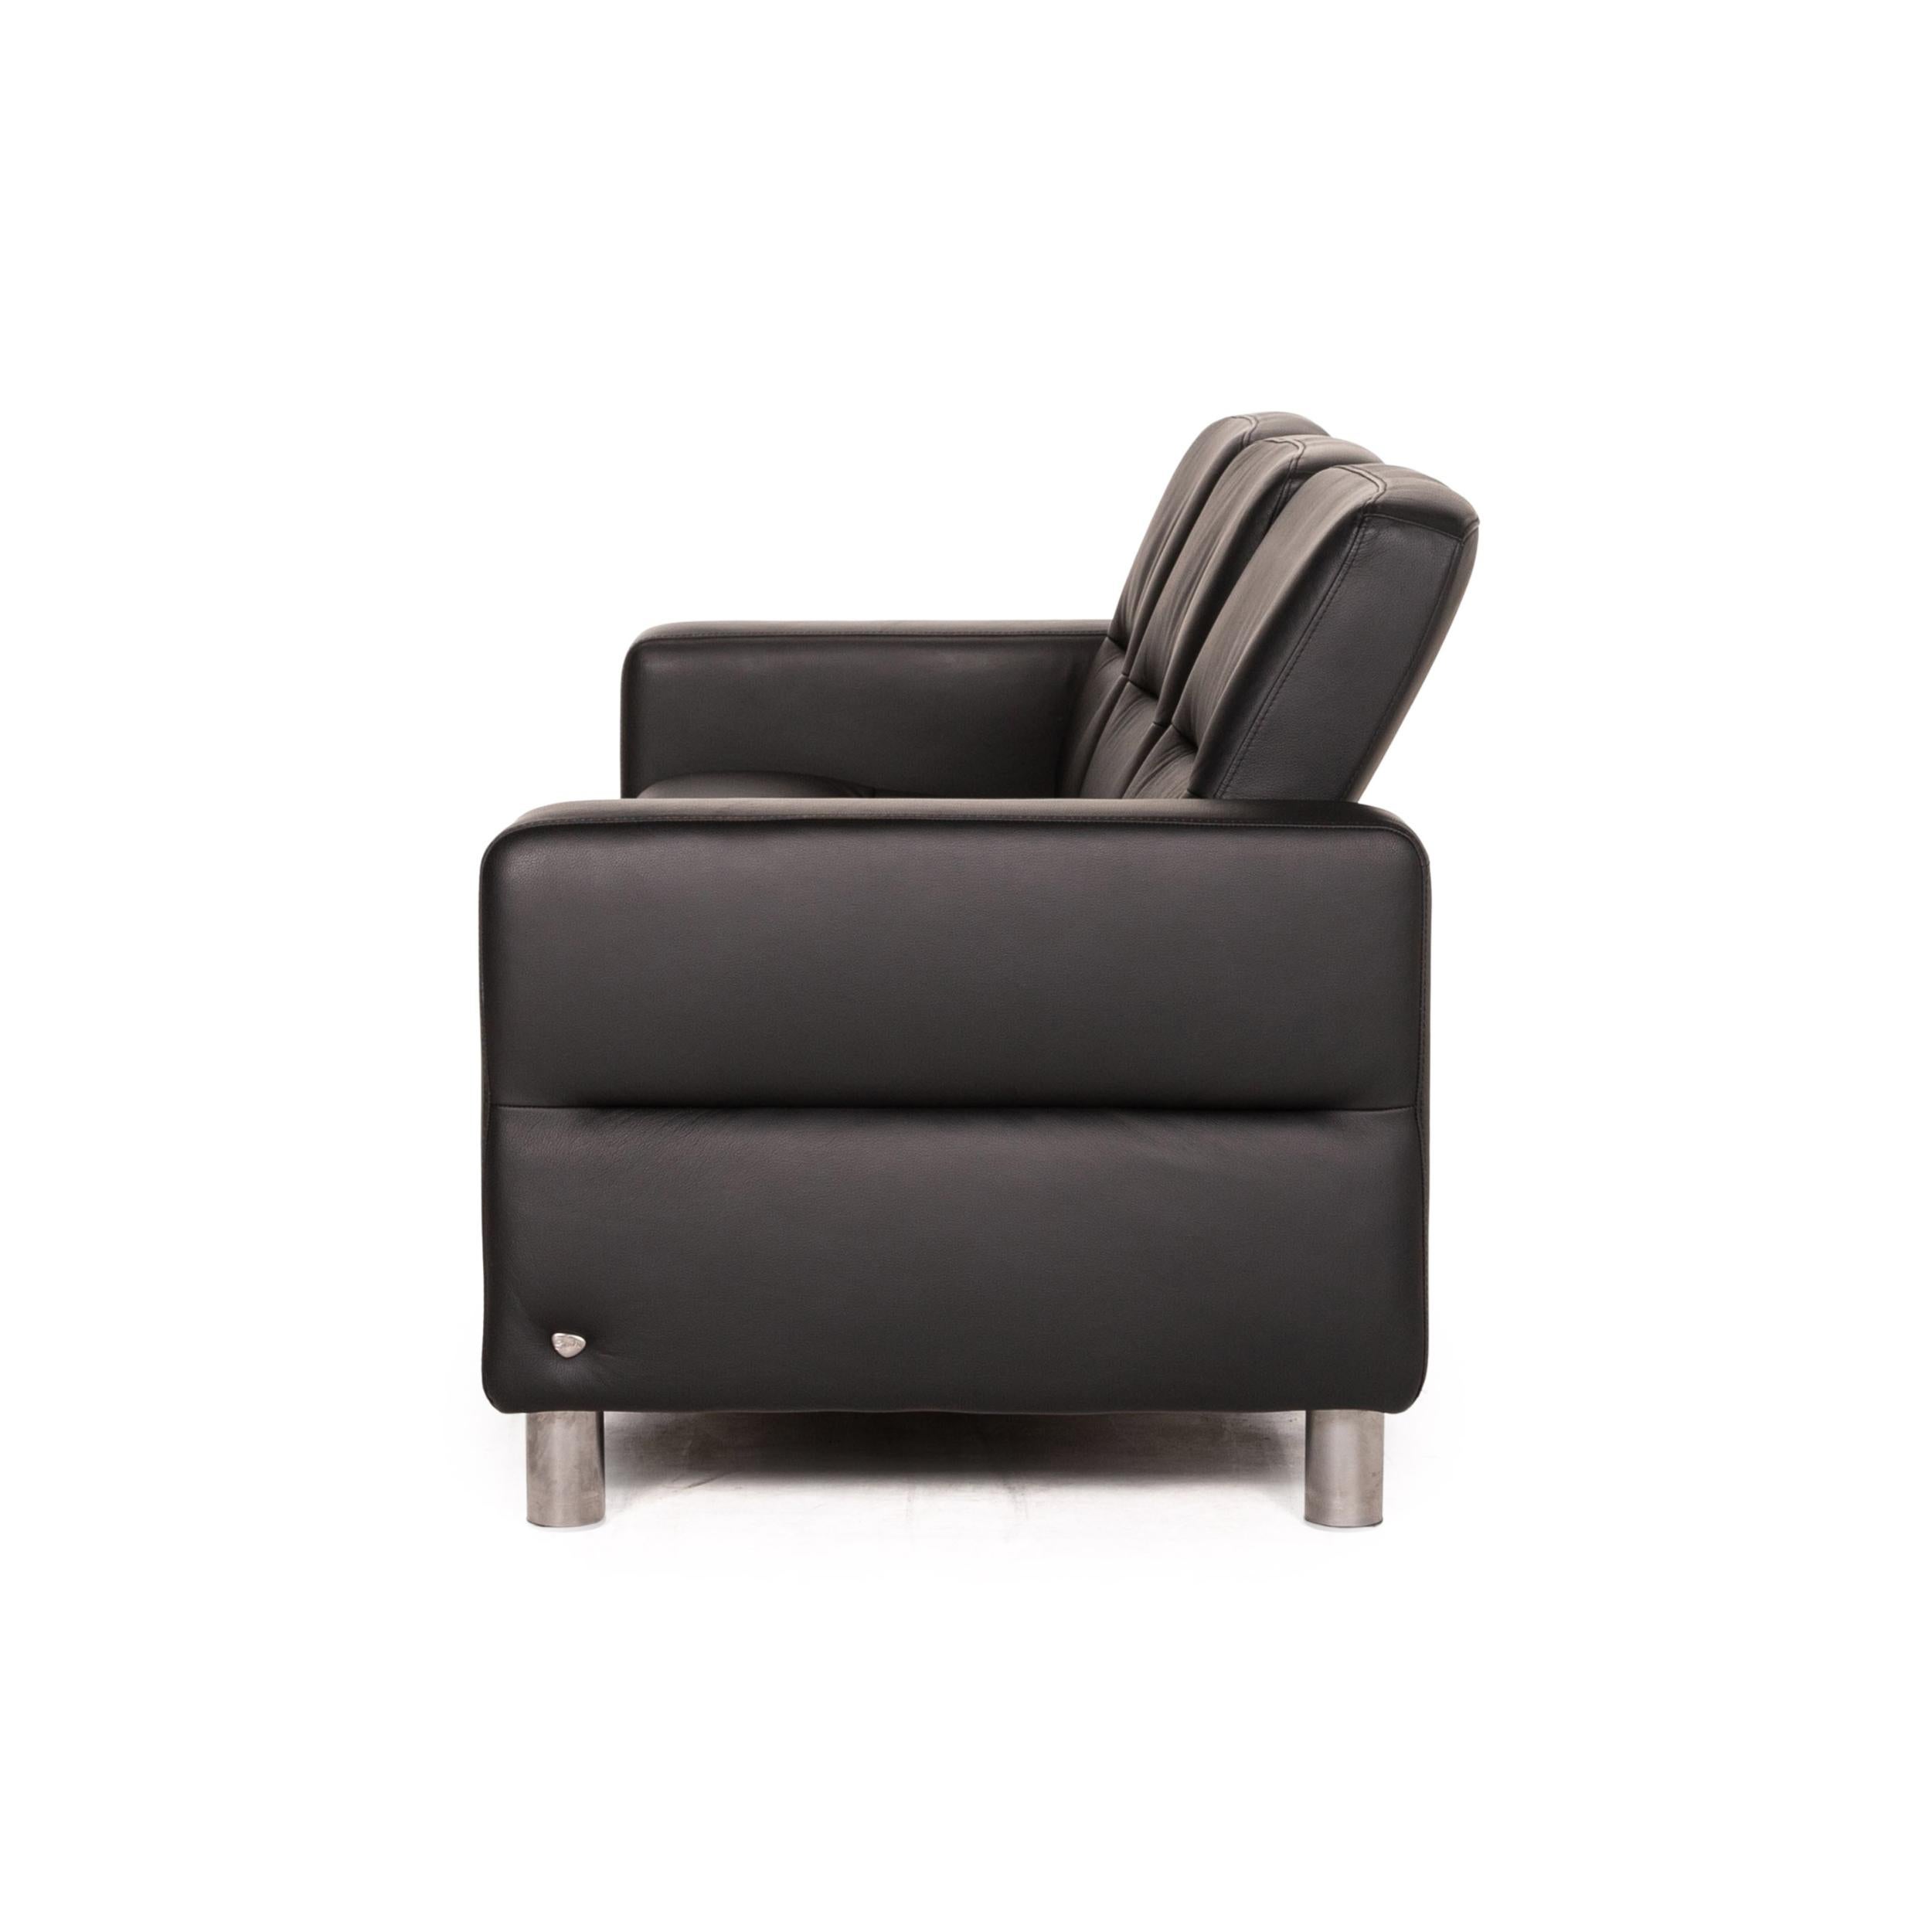 Stressless Waver Three Seater Leather Sofa Black Couch 5